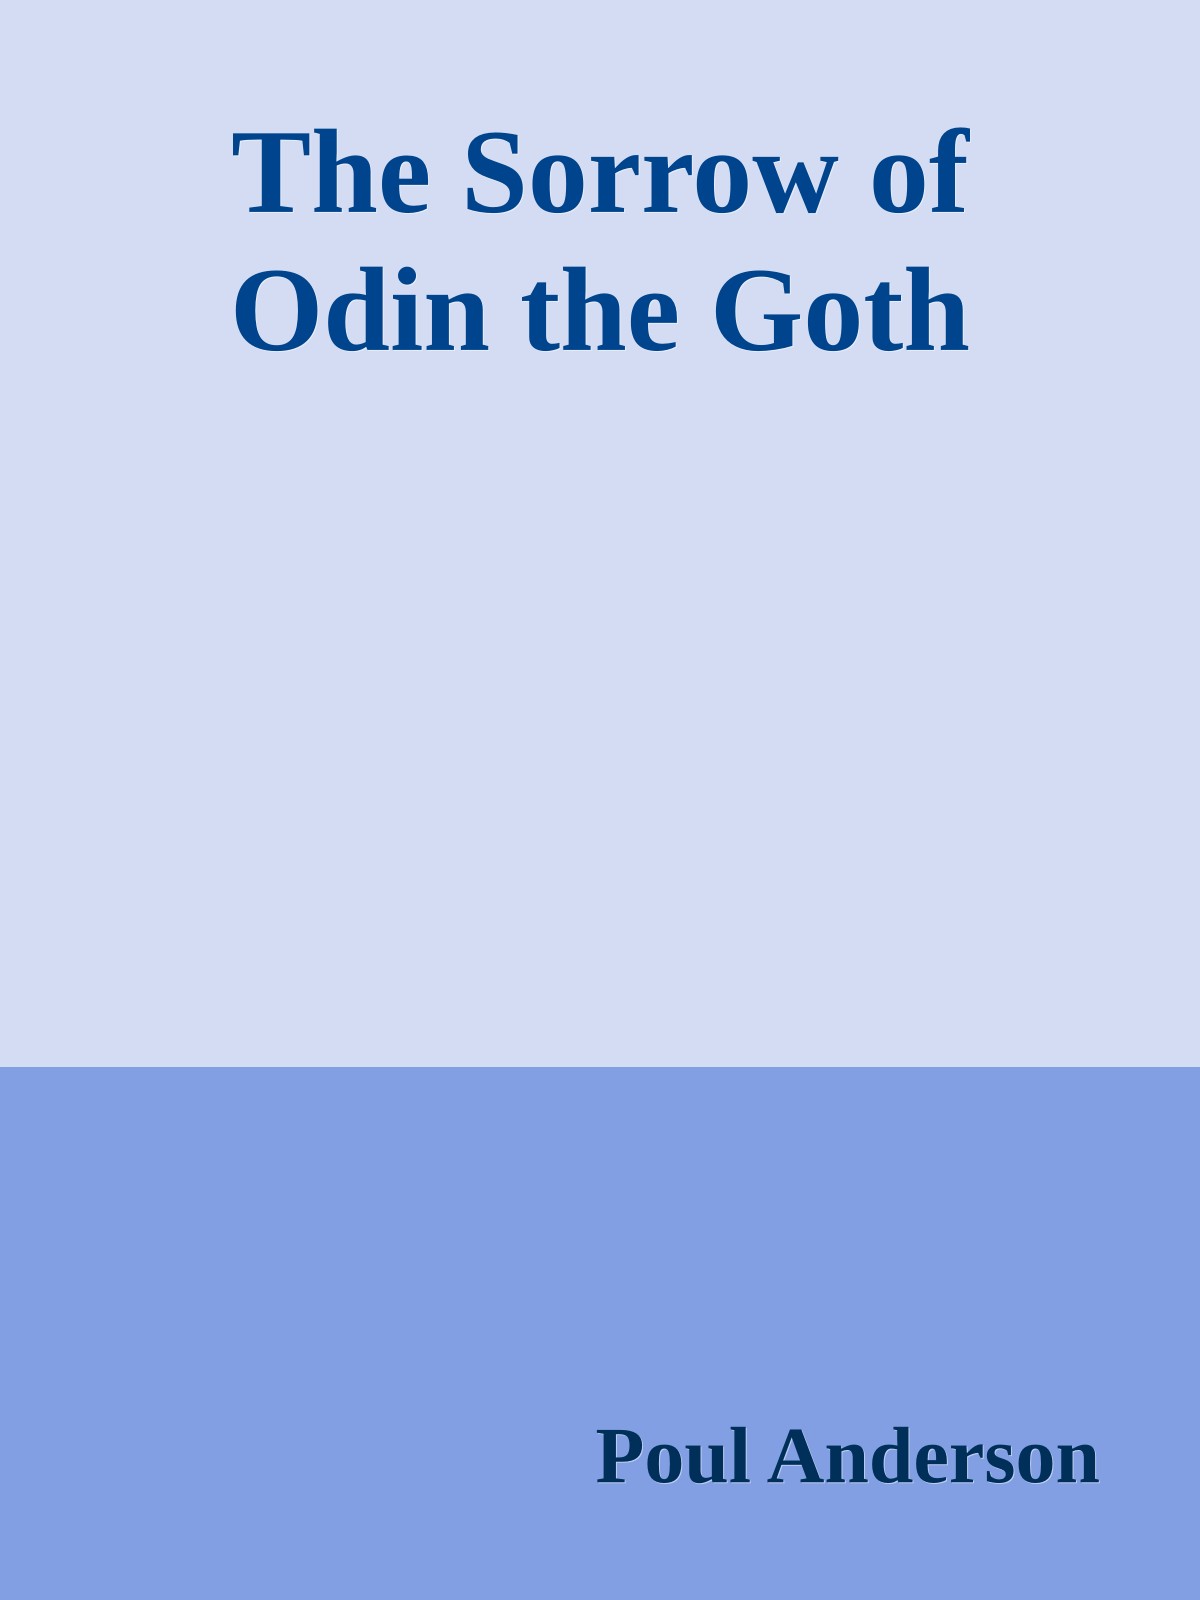 The Sorrow of Odin the Goth